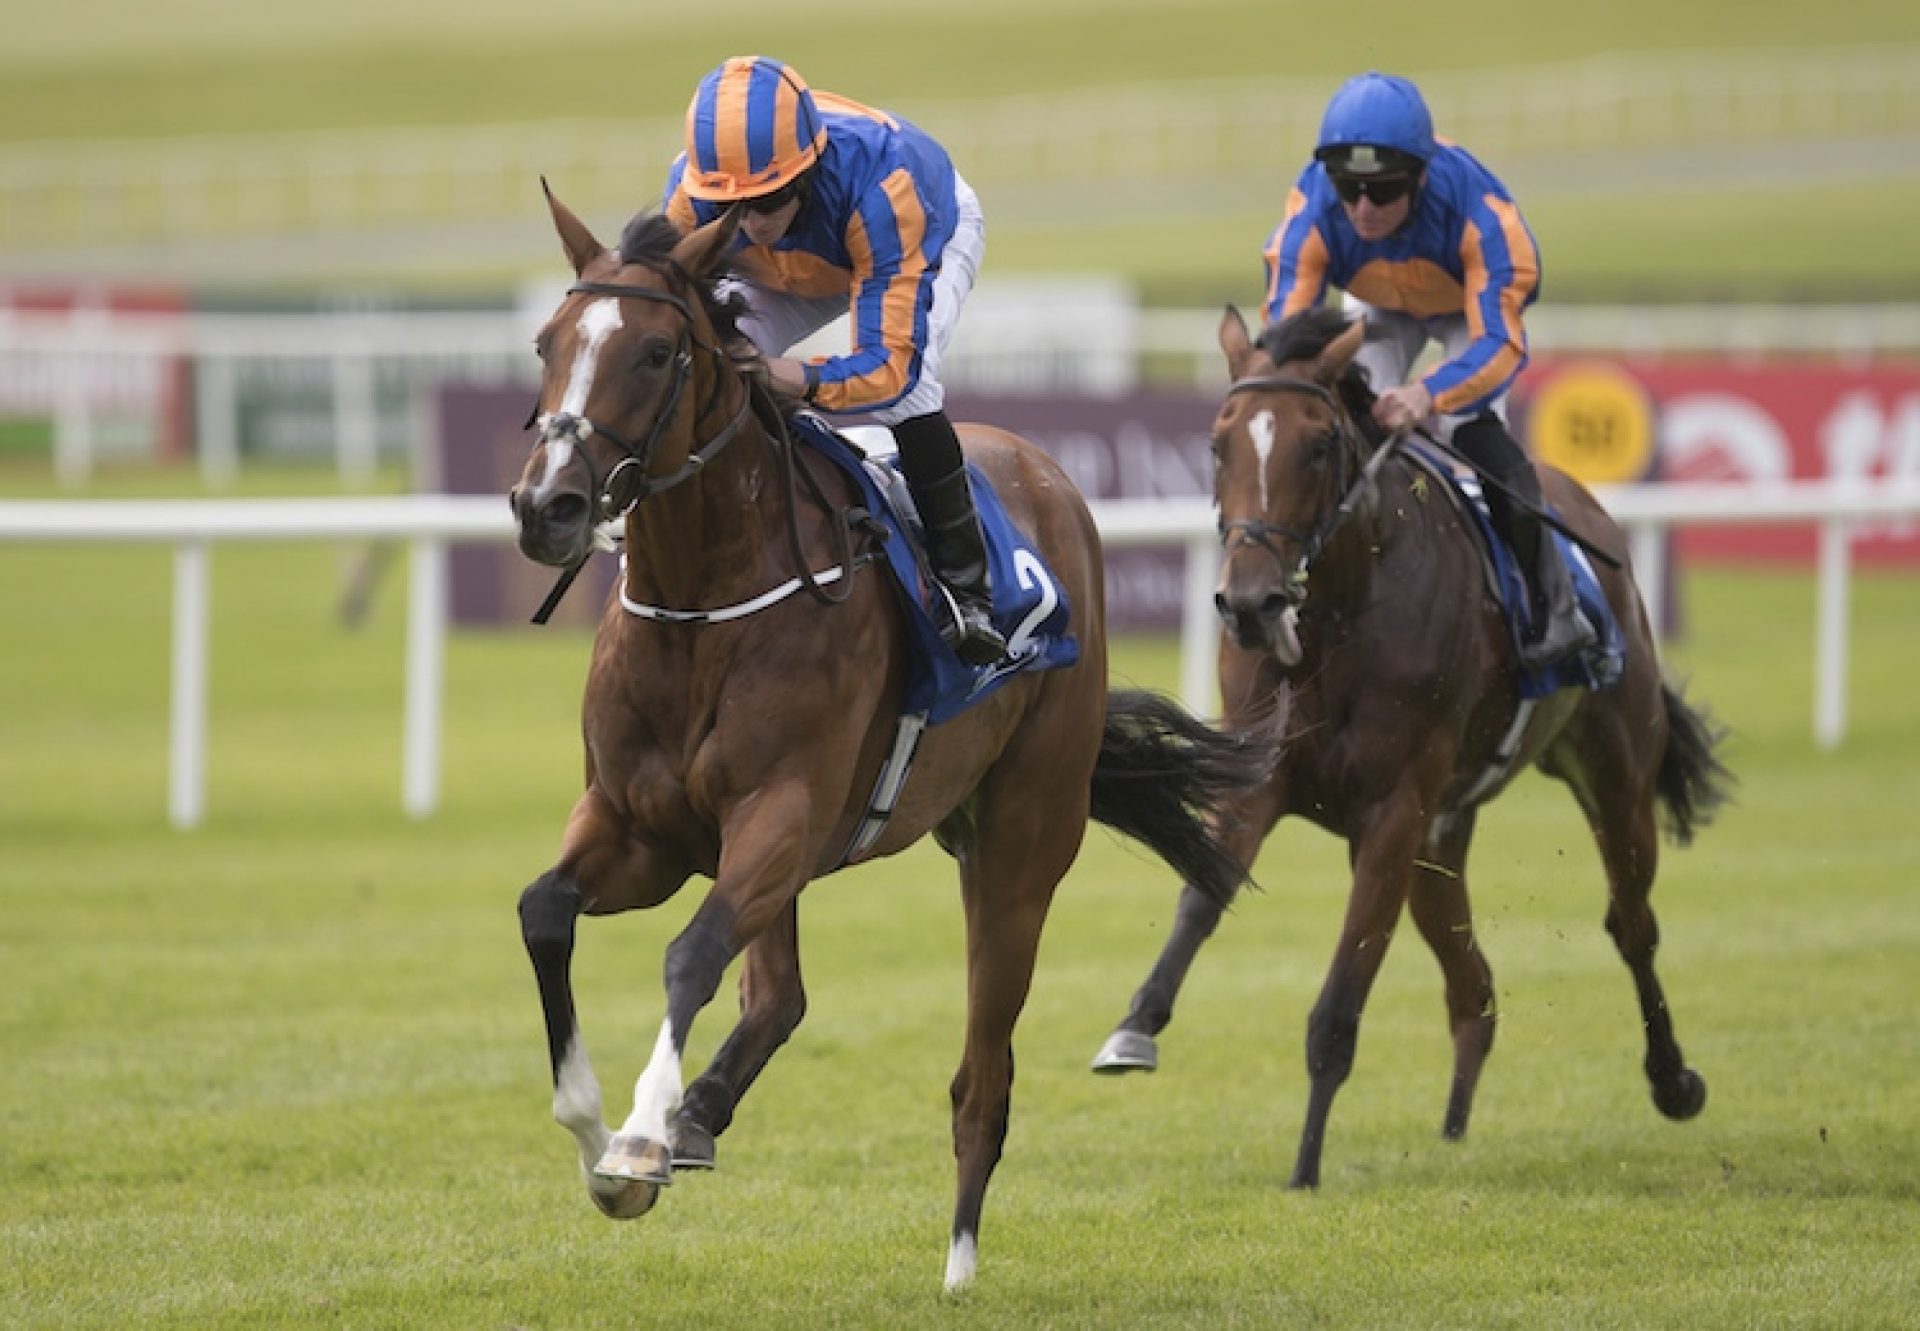 Clemmie (Galileo) winning the G3 Grangecon Stud Stakes at the Curragh